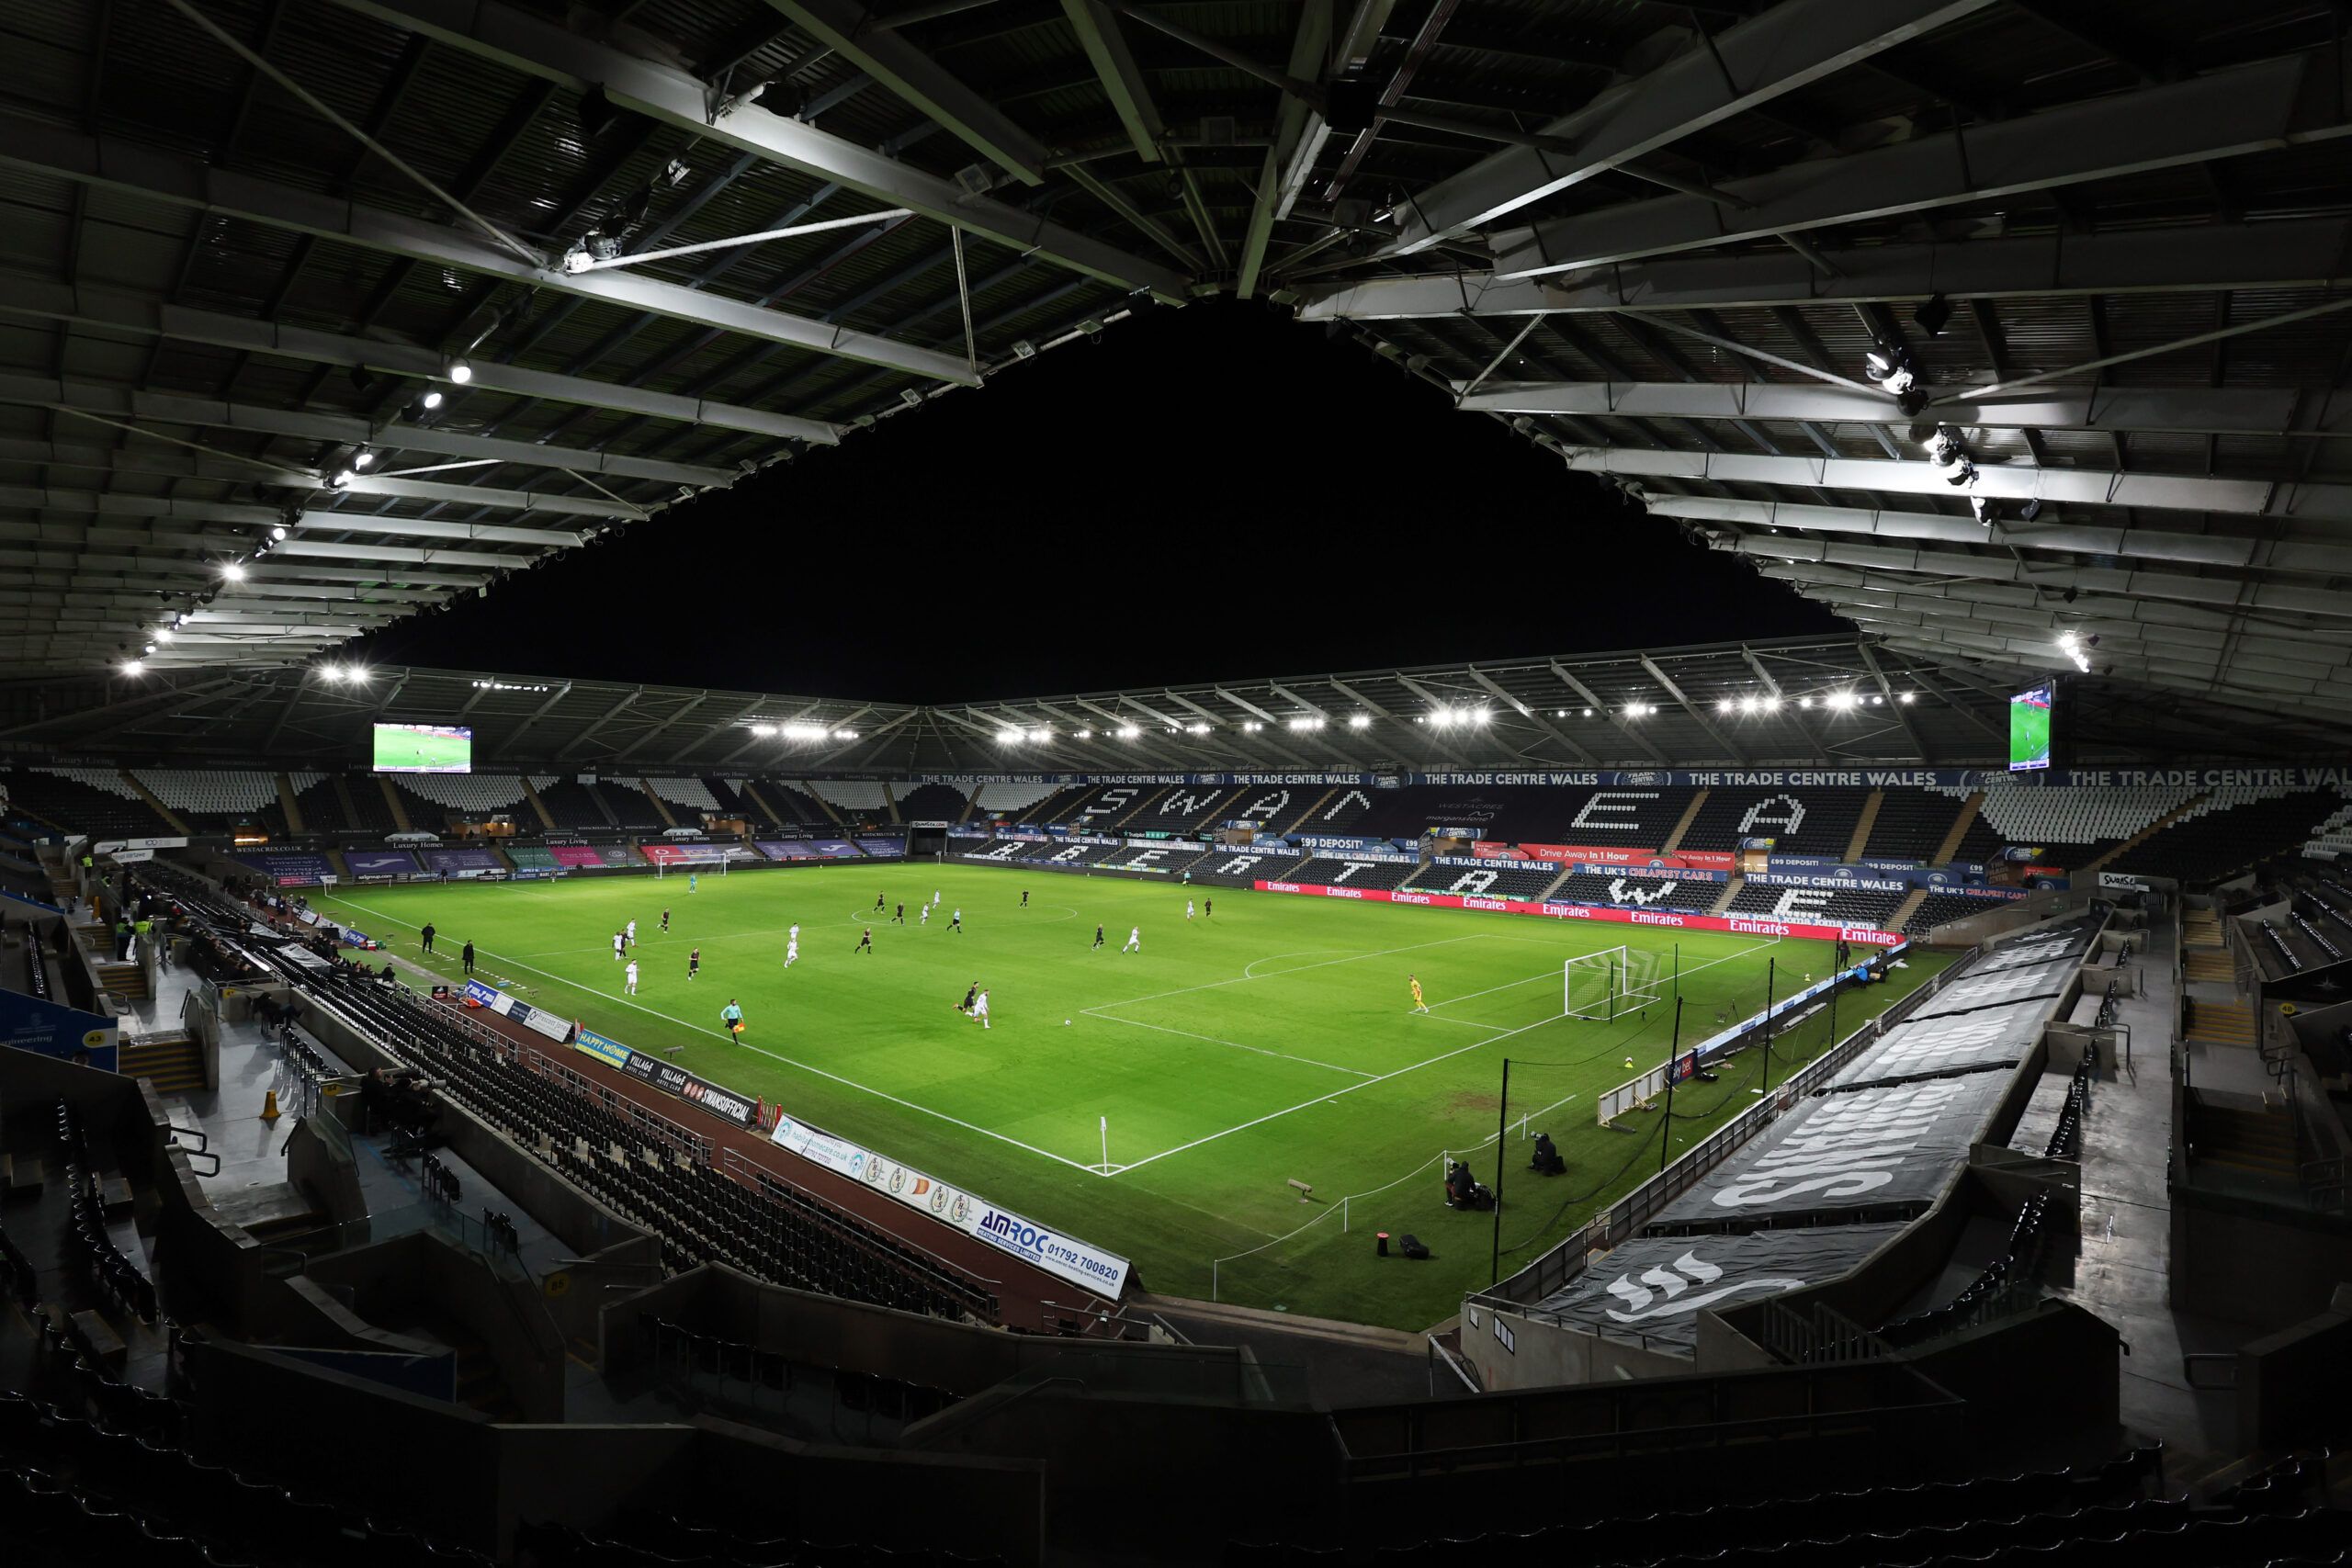 Soccer Football - FA Cup Third Round - Swansea City v Southampton - Swansea.com Stadium, Swansea, Wales, Britain - January 8, 2022 General view inside the stadium during the match Action Images via Reuters/Matthew Childs